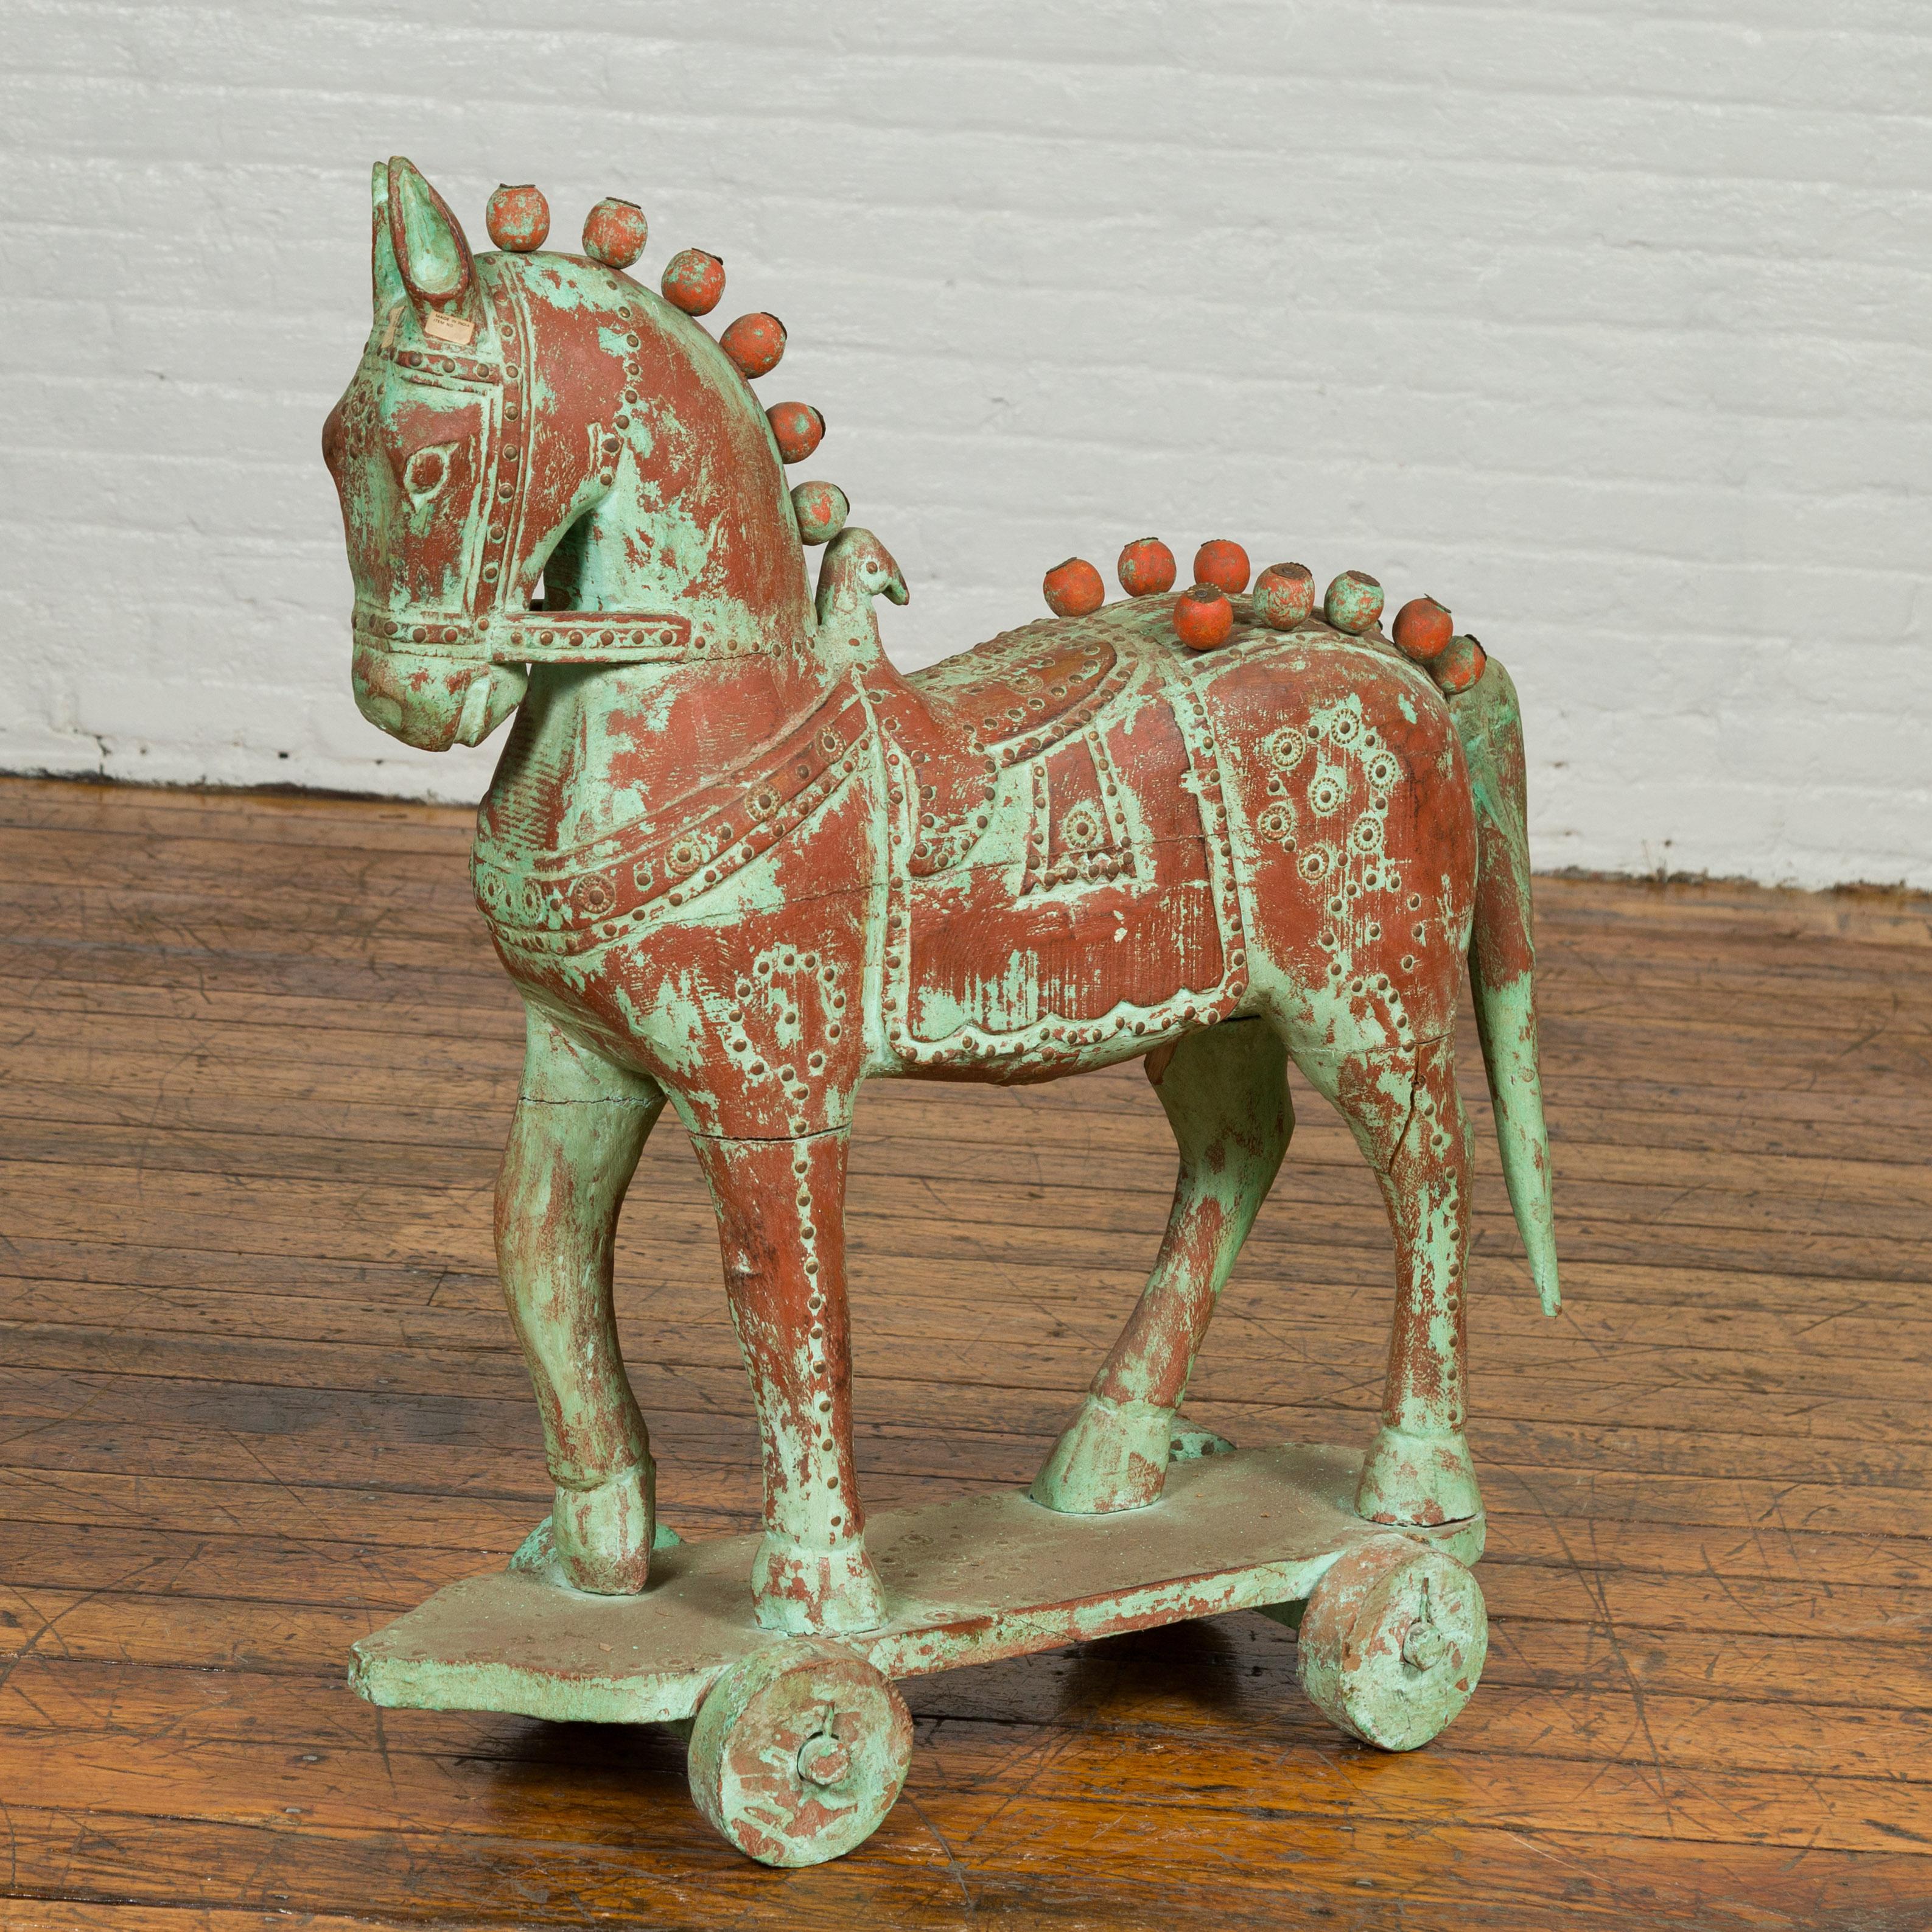 A small Indian vintage carved wooden horse sculpture from Madras with distressed rust and verdigris and iron red colored patina and petite spheres. Born in the Indian state of Tamil Nadu during the midcentury period, this carved horse charms us with